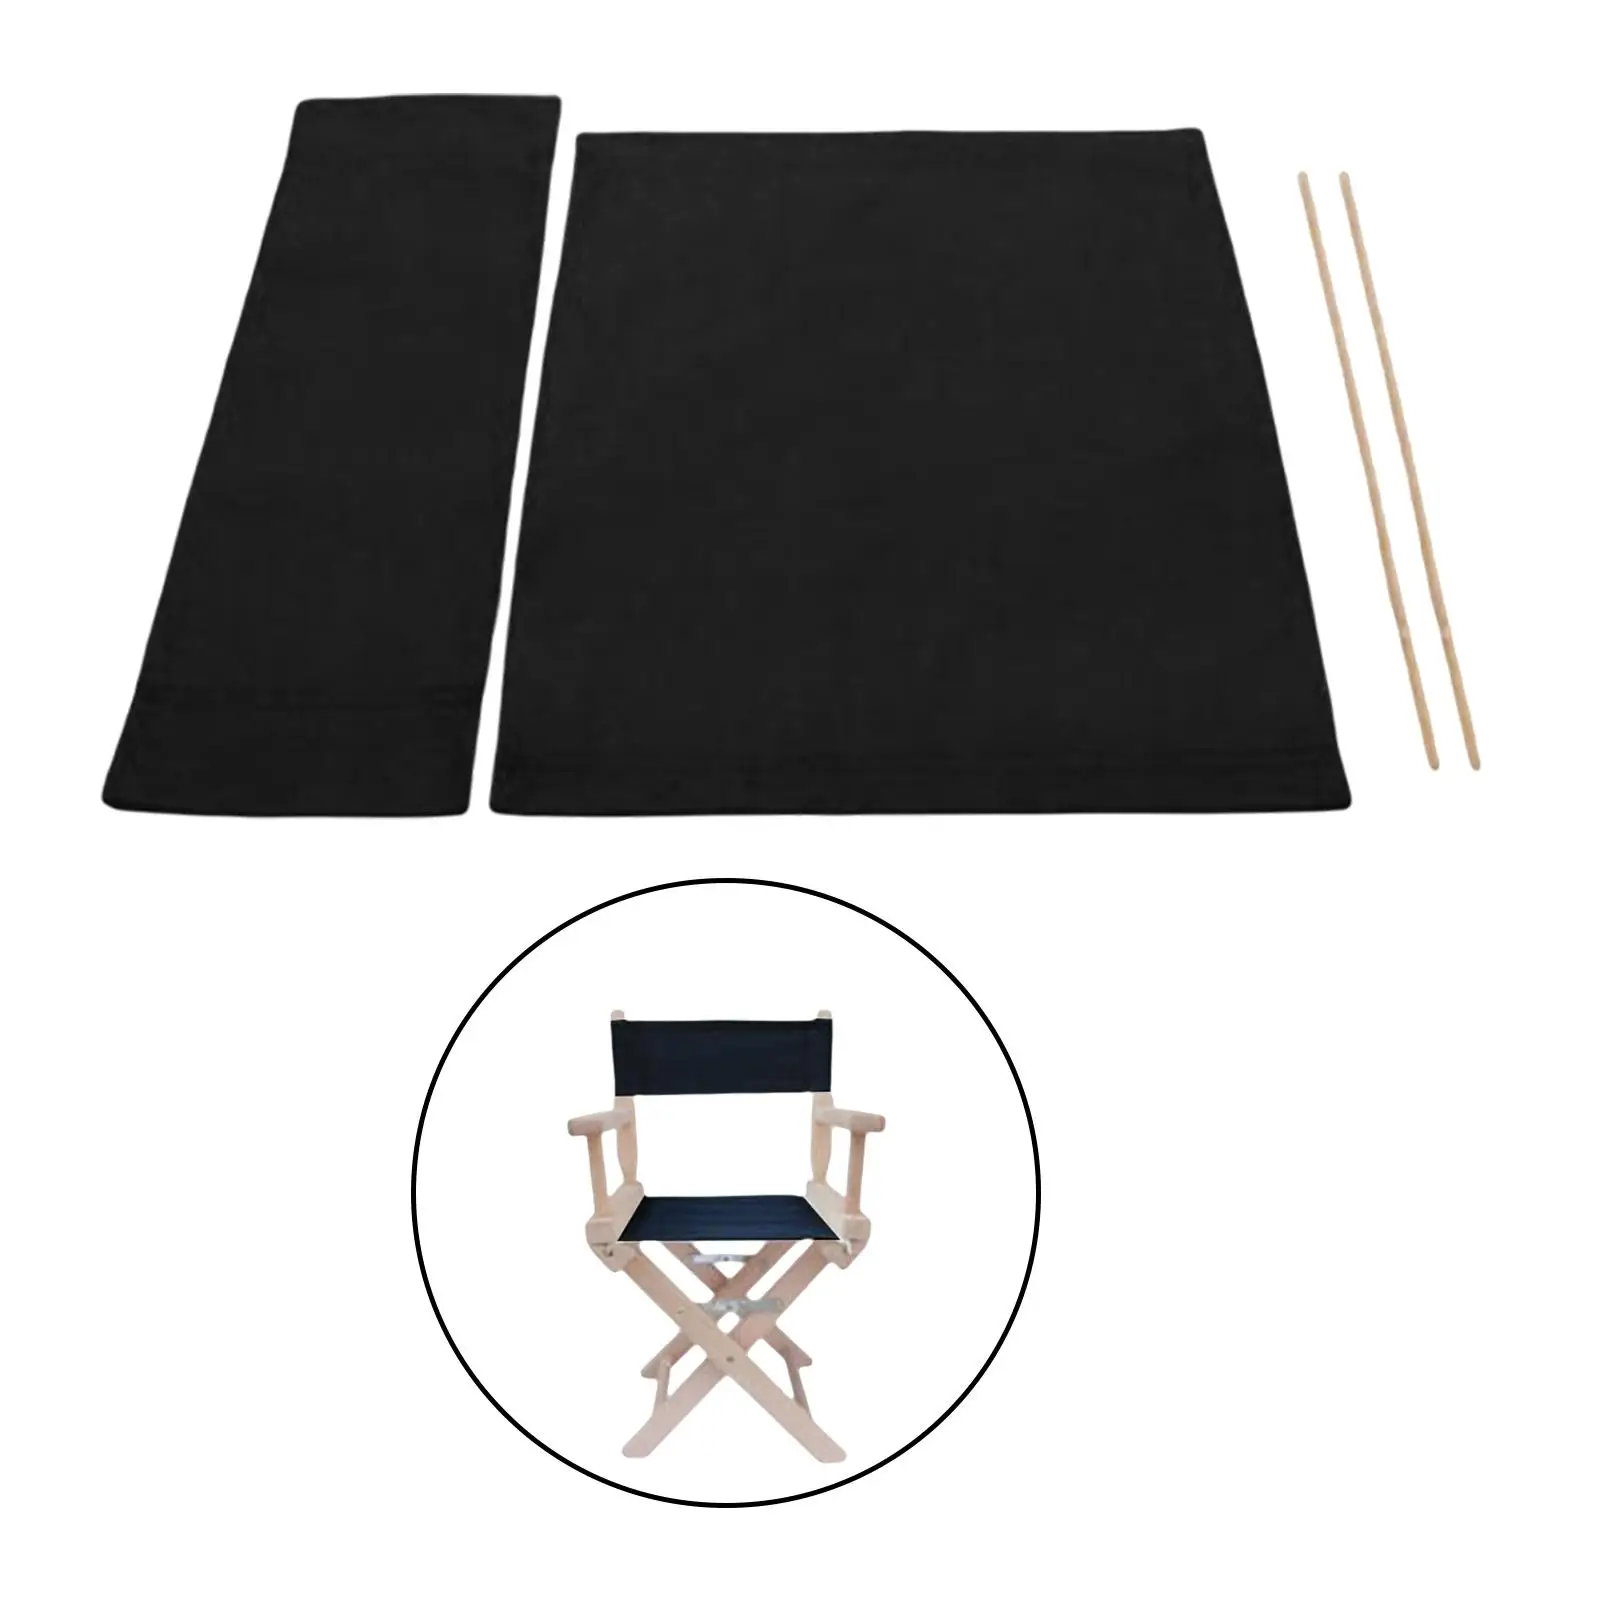 Directors Chairs Cover Easy to clean Covers Patio Covers Furniture Seat Seat and Back Chair Covers for Director Chair